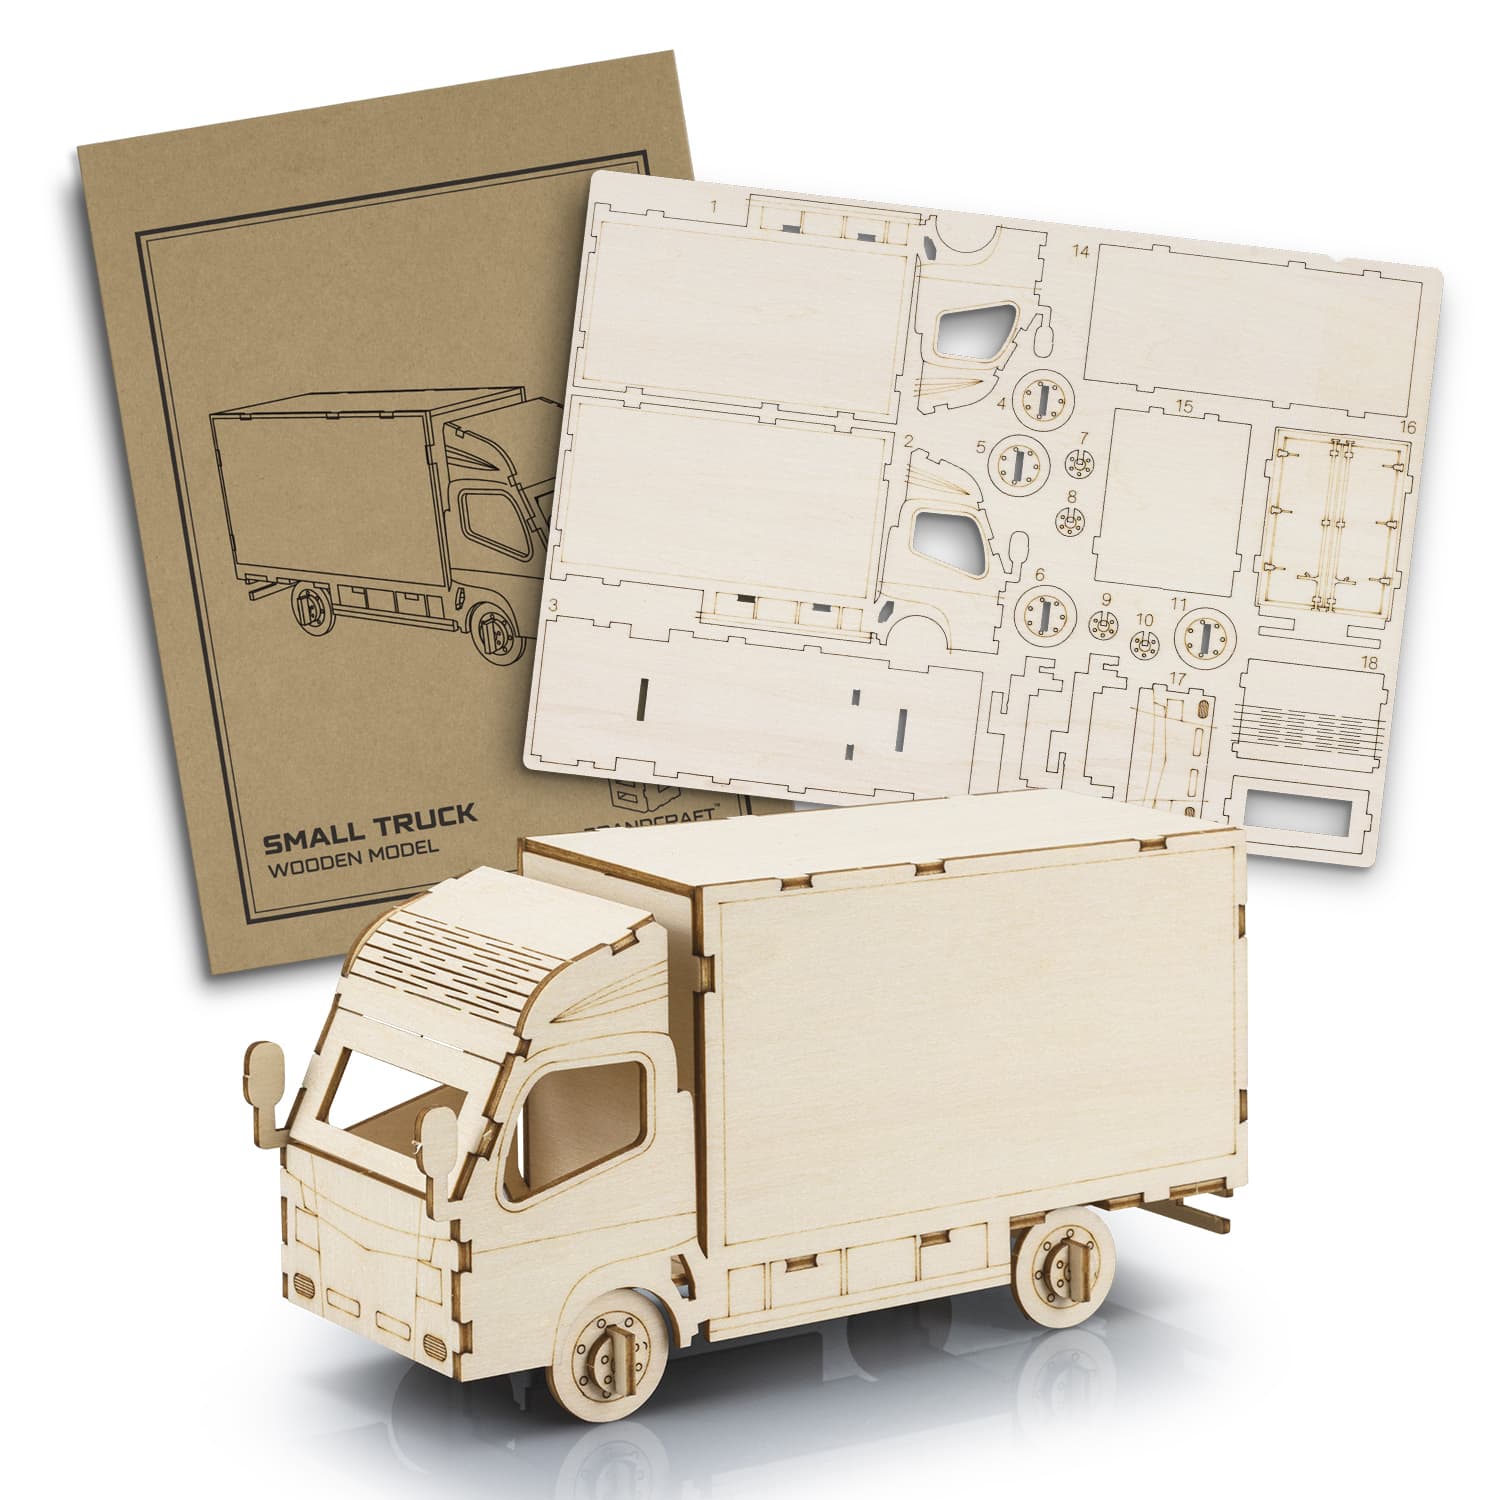 BRANDCRAFT Small Truck Wooden Model | Small Truck Wooden Model | Custom Merchandise | Merchandise | Customised Gifts NZ | Corporate Gifts | Promotional Products NZ | Branded merchandise NZ | Branded Merch | Personalised Merchandise | Custom Promotional 